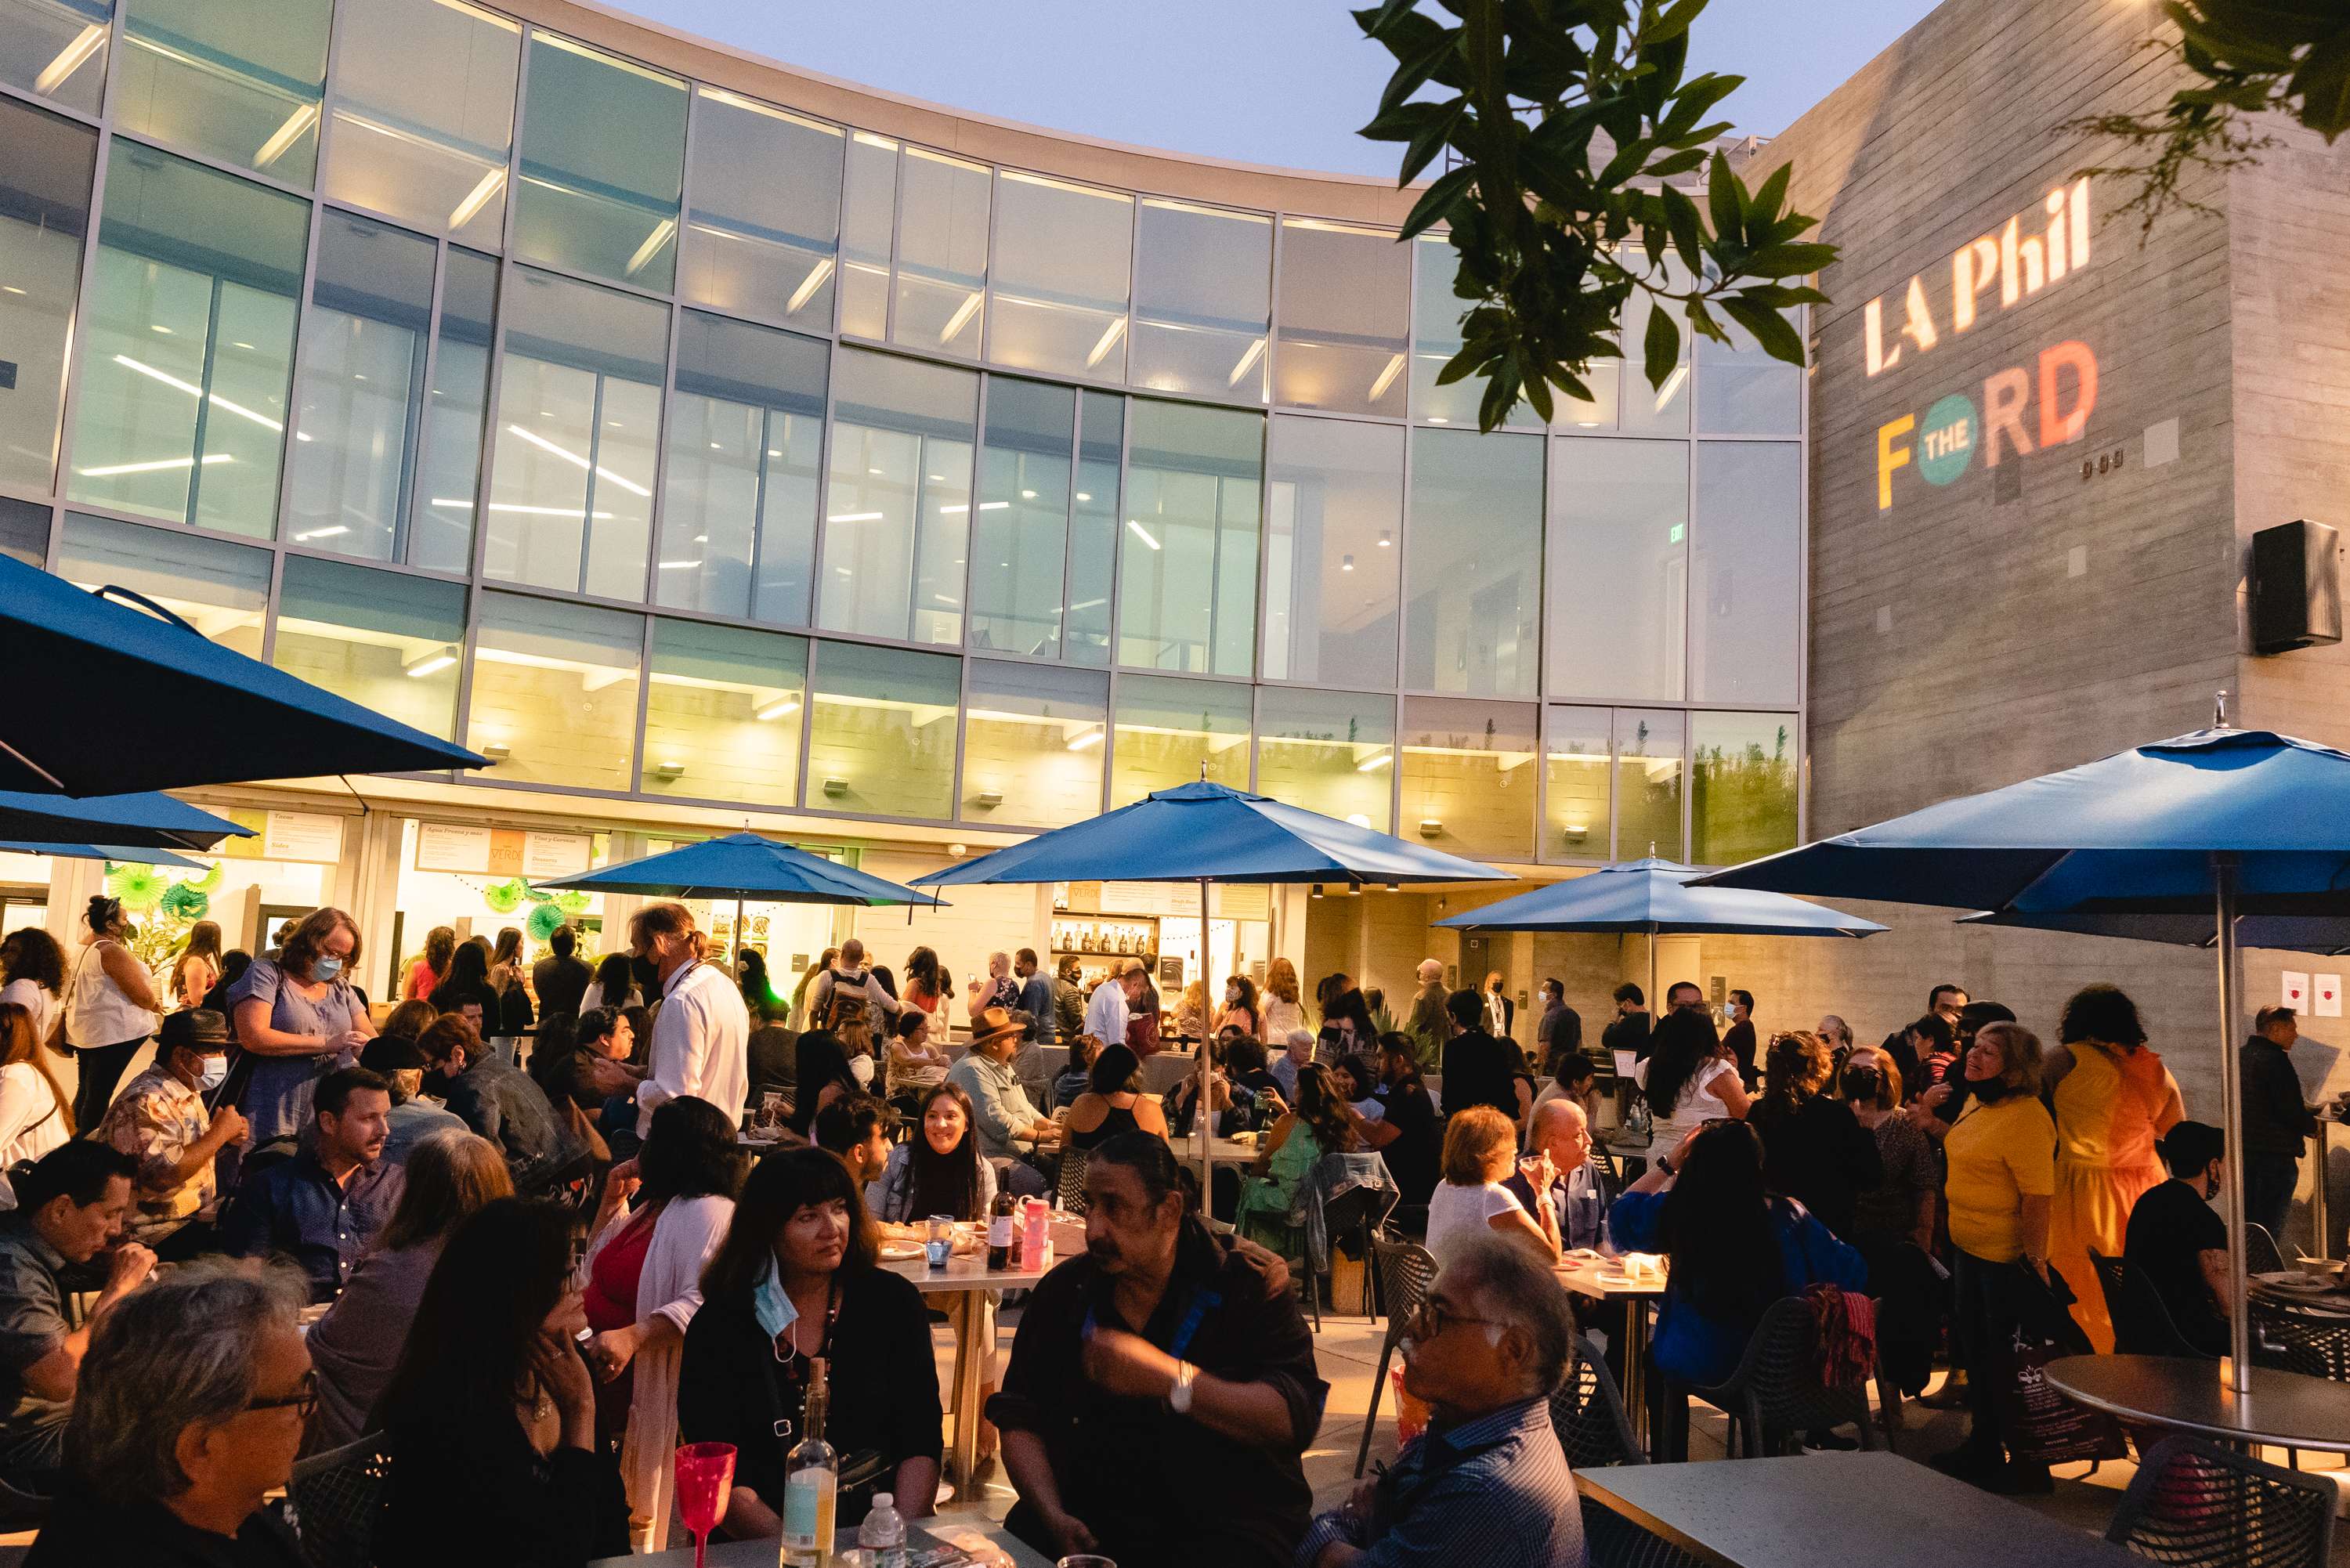 The Ford Terrace at night time is packed with hungry concertgoers. The LA Phil and Ford logos are projected onto the building in the background.